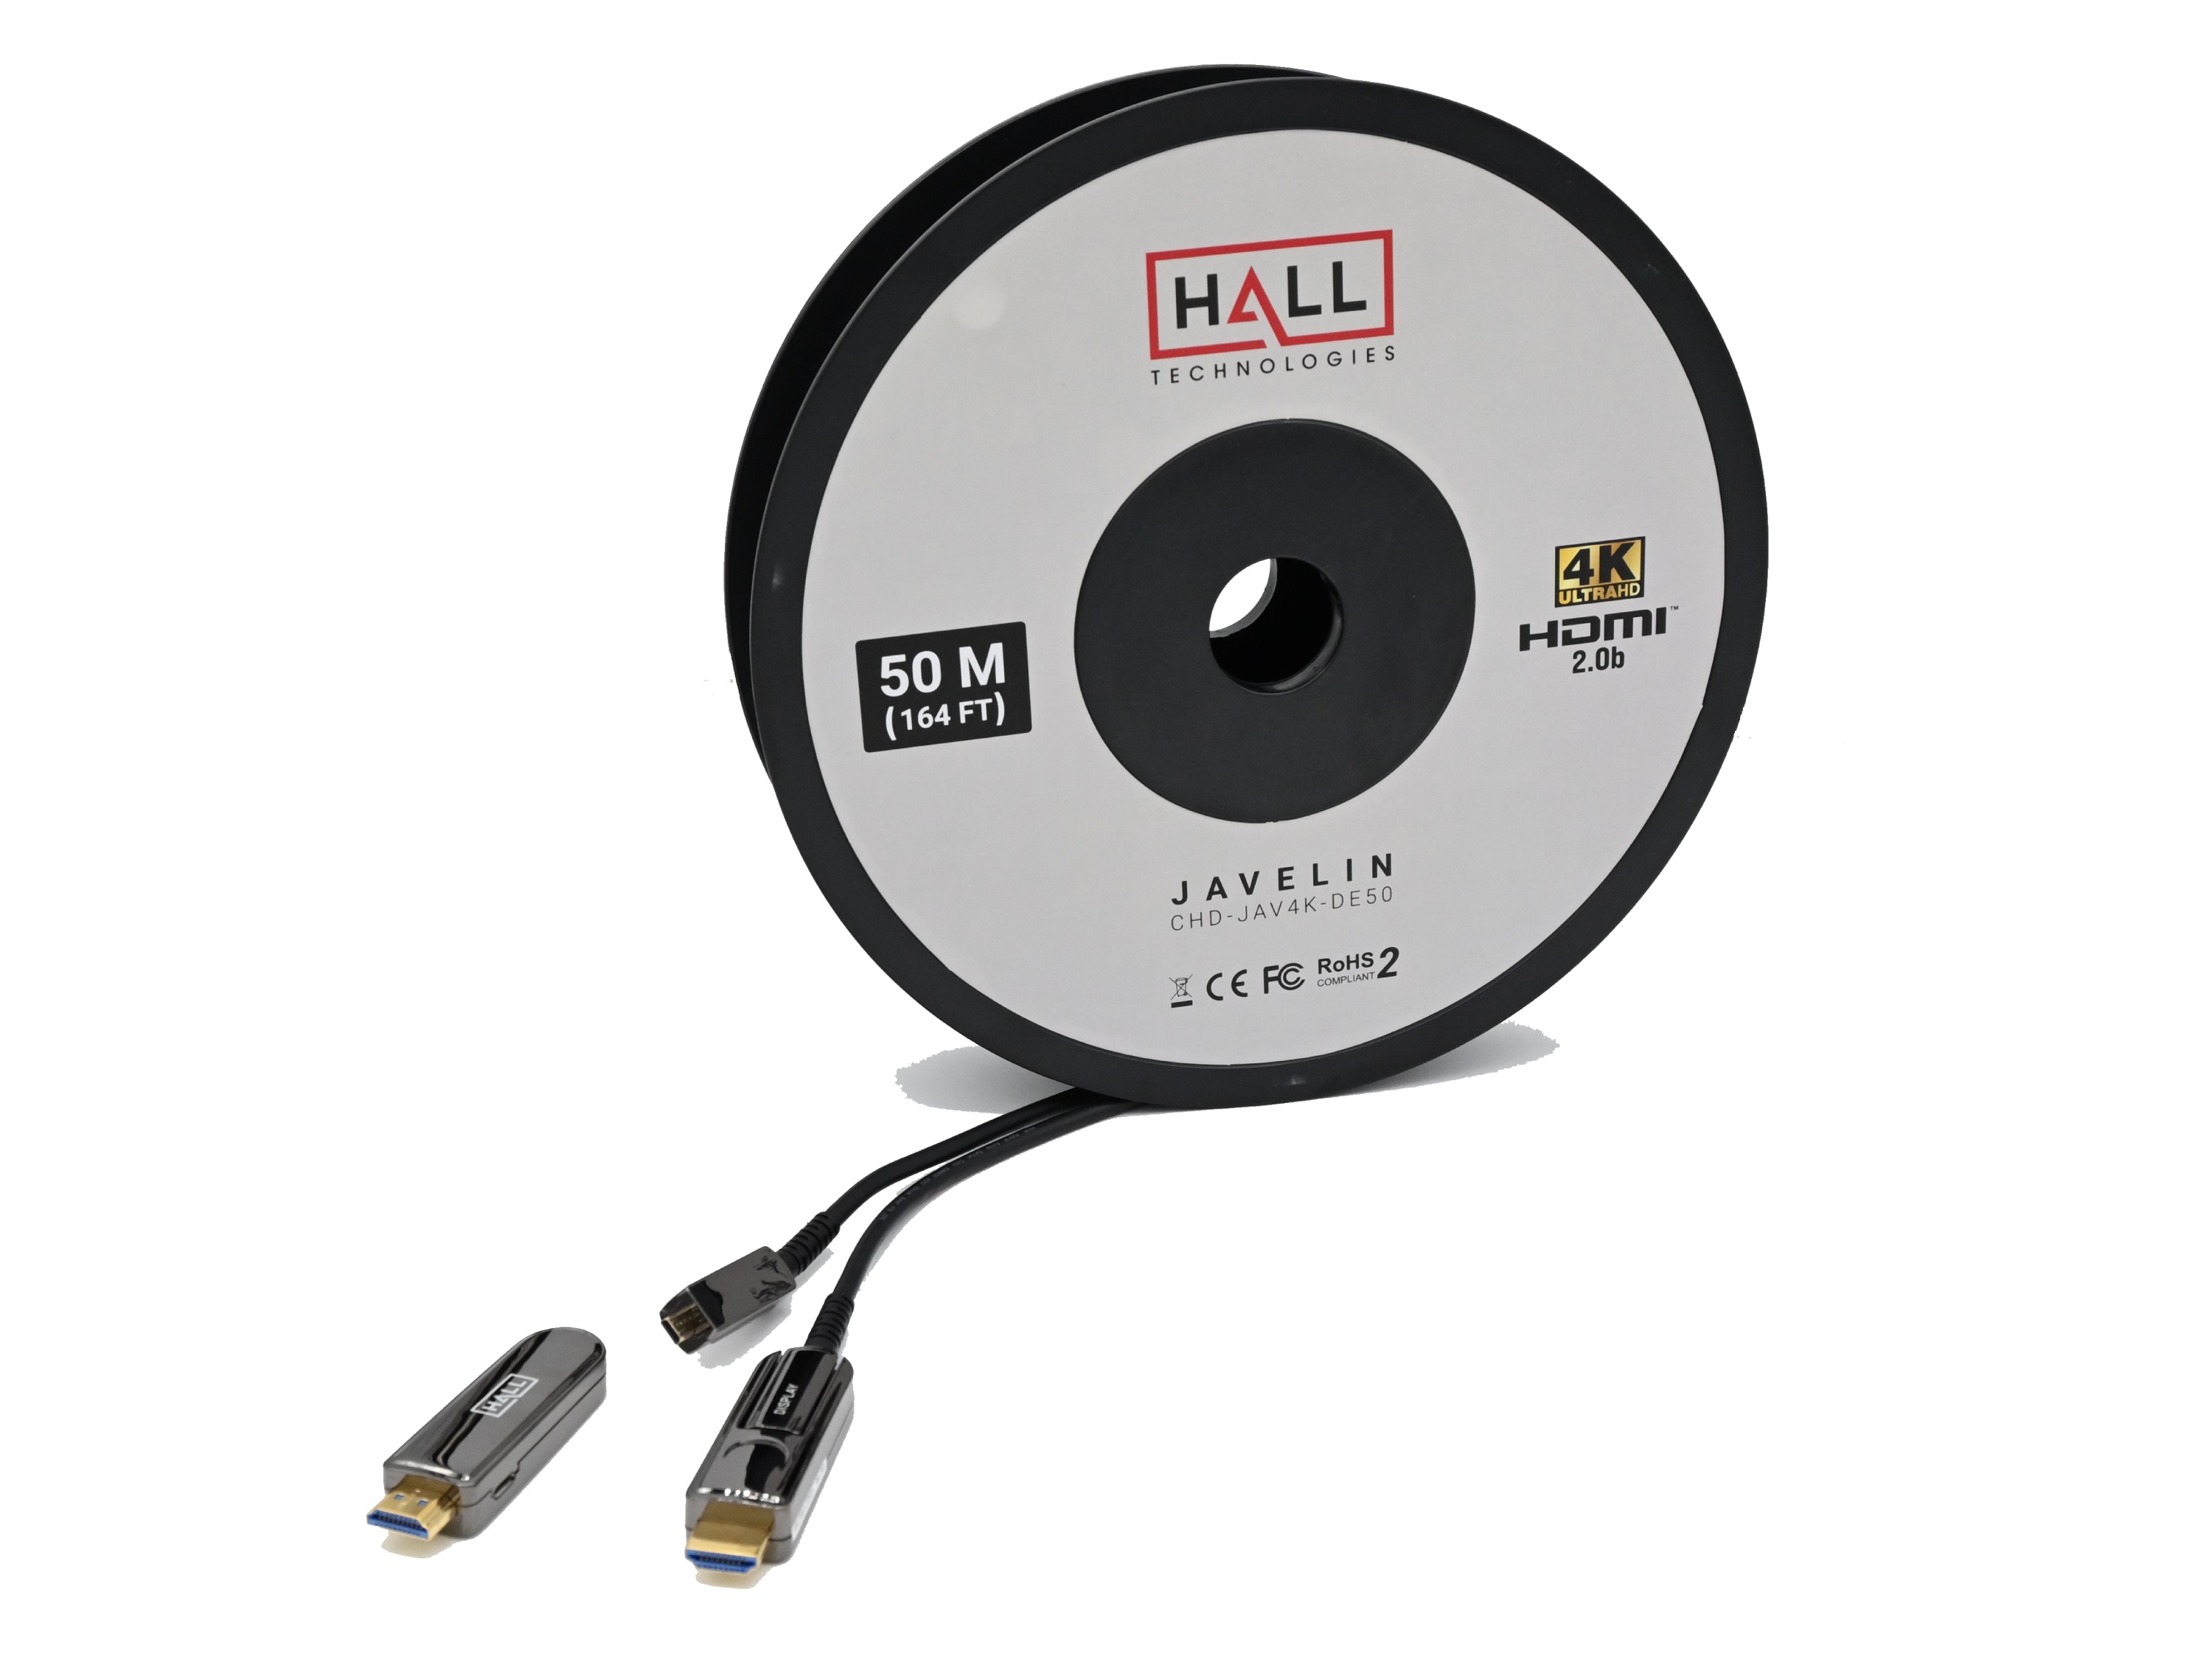 CHD-JAV4K-DE25 25m/75ft 18 Gbps 4K Javelin Active Plenum HDMI Cable with Detachable Ends by Hall Technologies